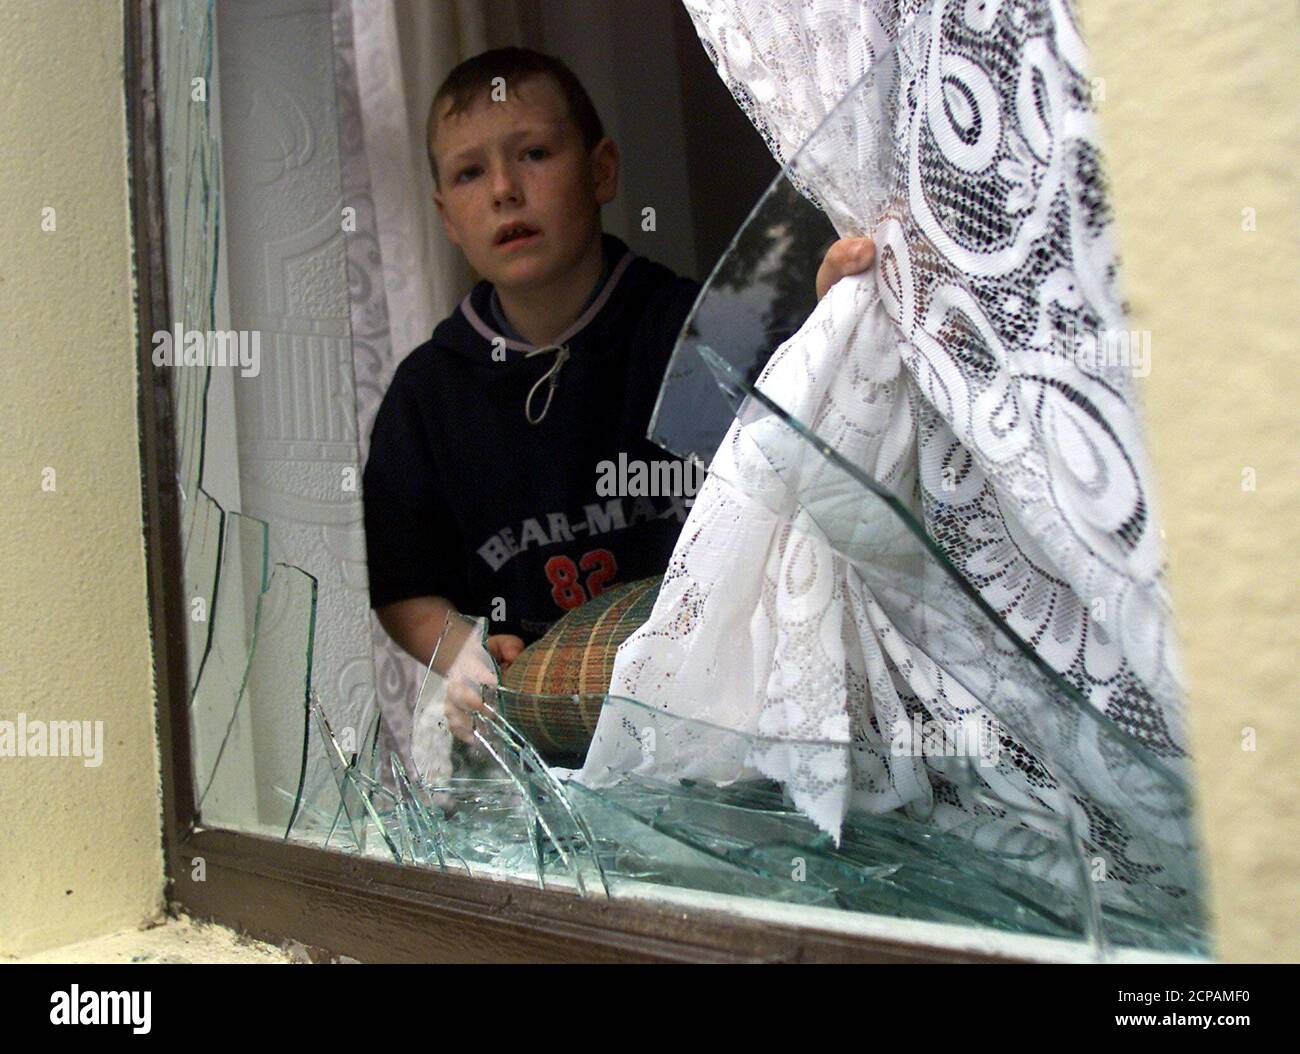 A young boy looks out though a smashed front window following trouble with Loyalists attacking nationalists' homes in the Duncain Gardens area of north Belfast, Northern Ireland, June 21, 2002. Trouble flared on the day of the first big march of the contentious Protestant marching season in north Belfast where stones, bricks and other missiles were thrown over the peace line in Duncairn Gardens. REUTERS/Paul McErlane  PM/CRB Stock Photo